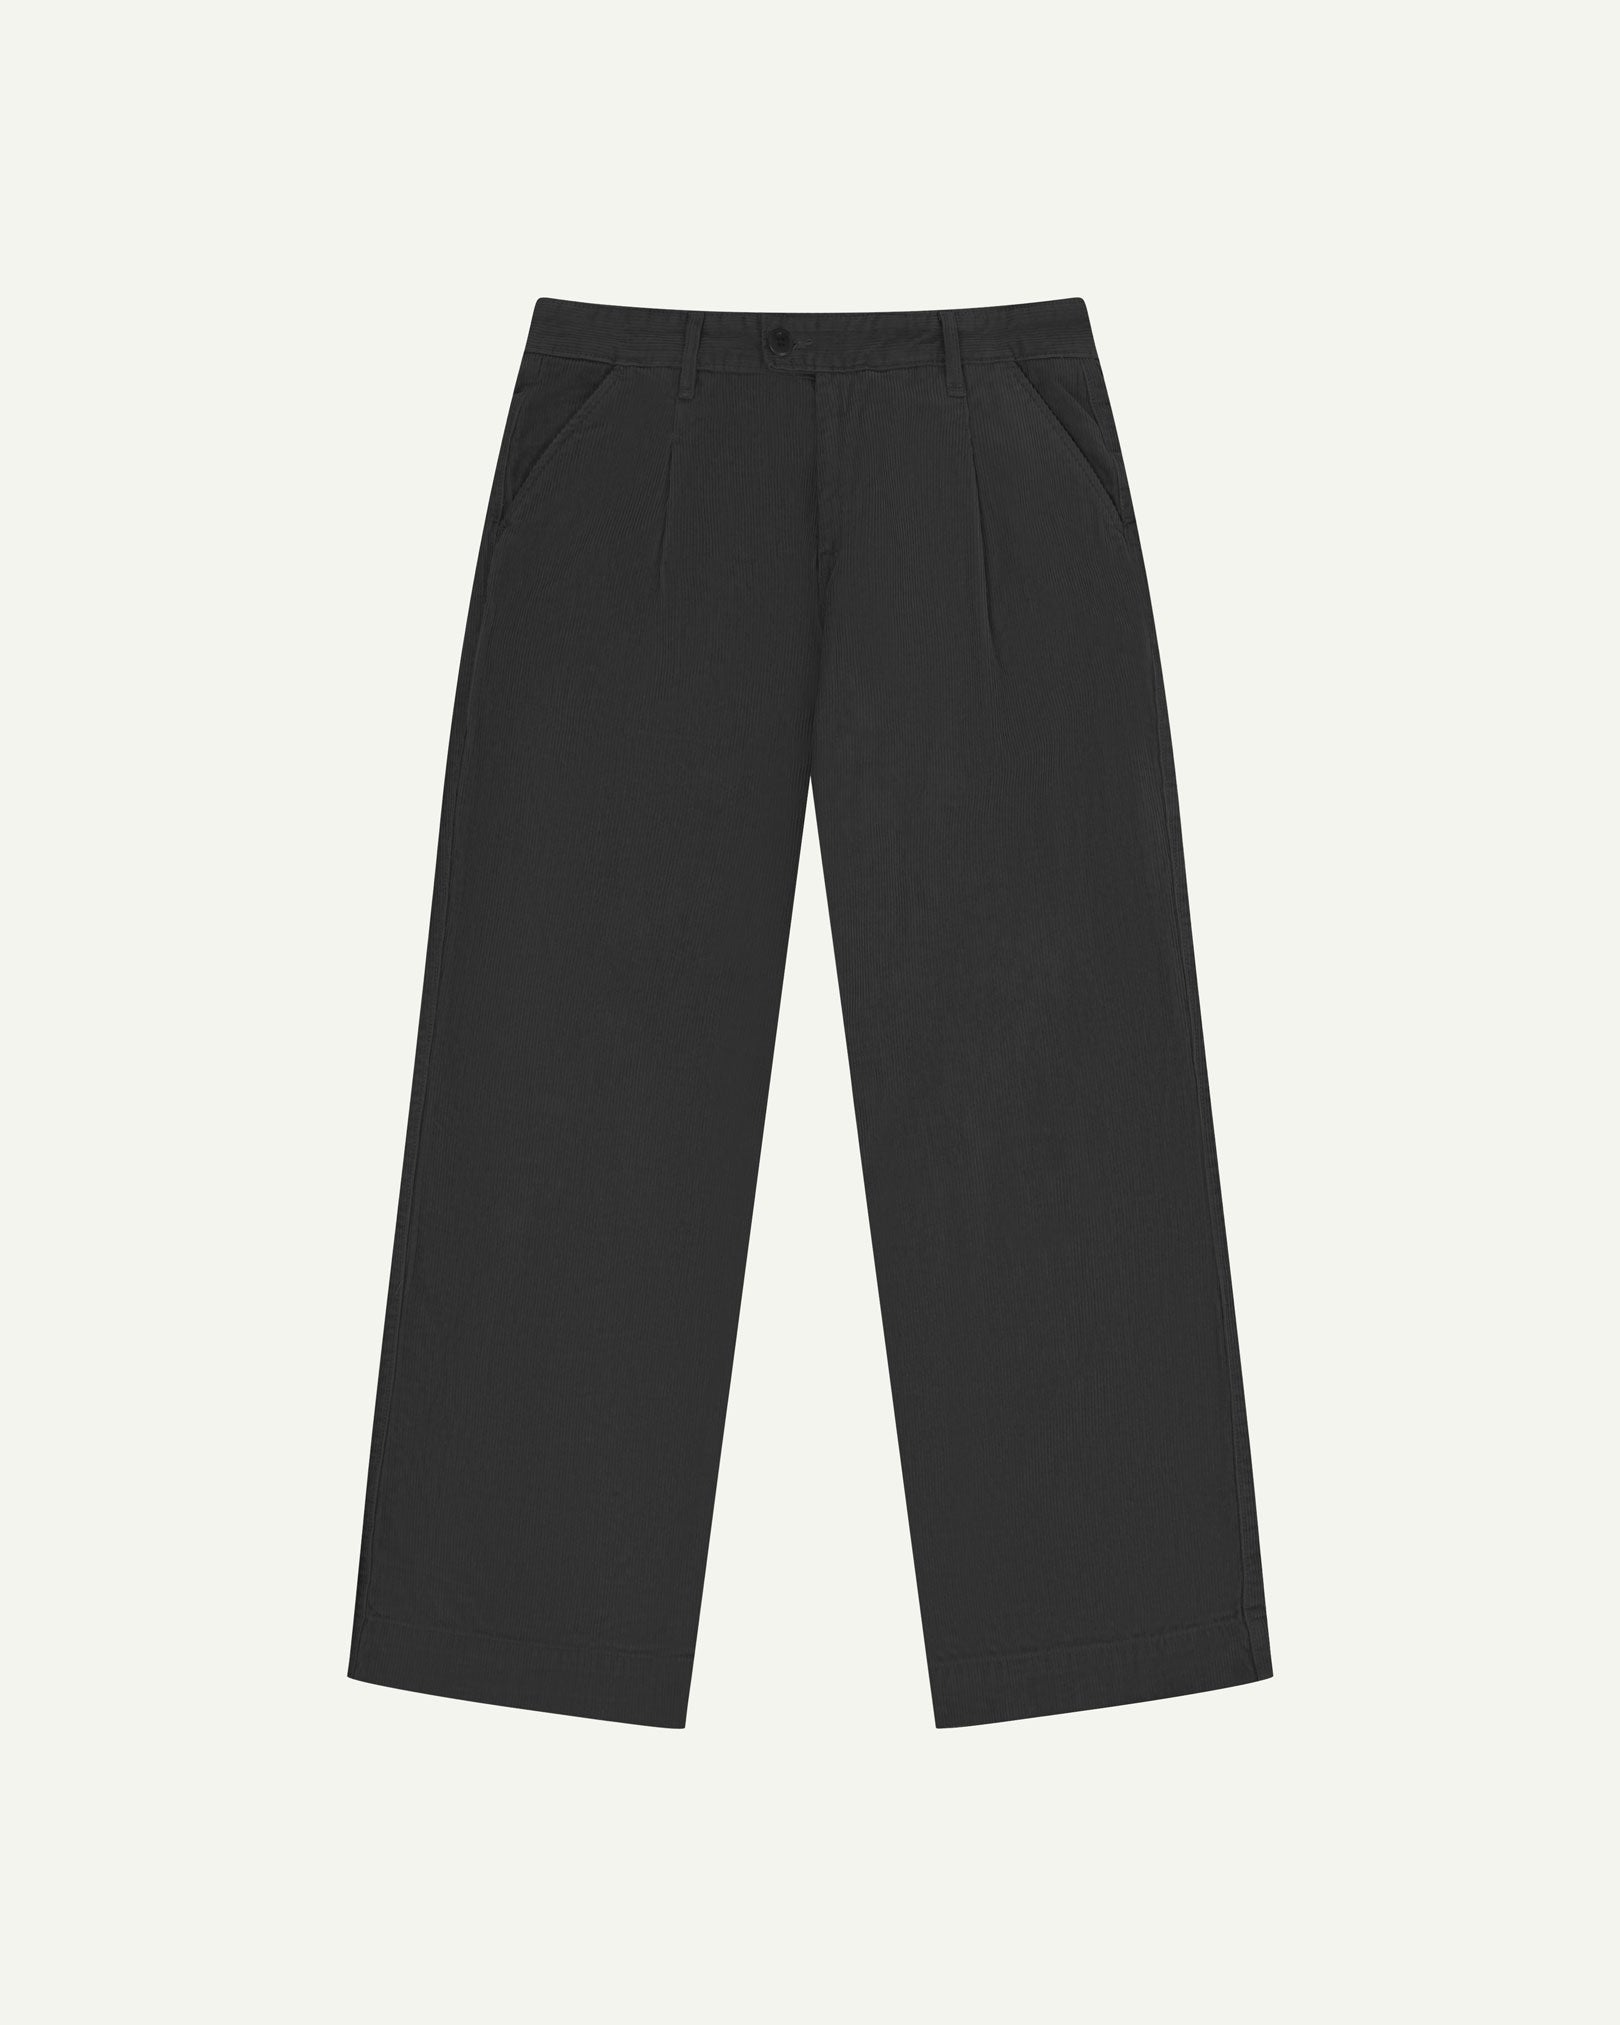 Front flat view of Uskees cord boat pants in faded black. Showing Corozo button fastening and wide leg fit.